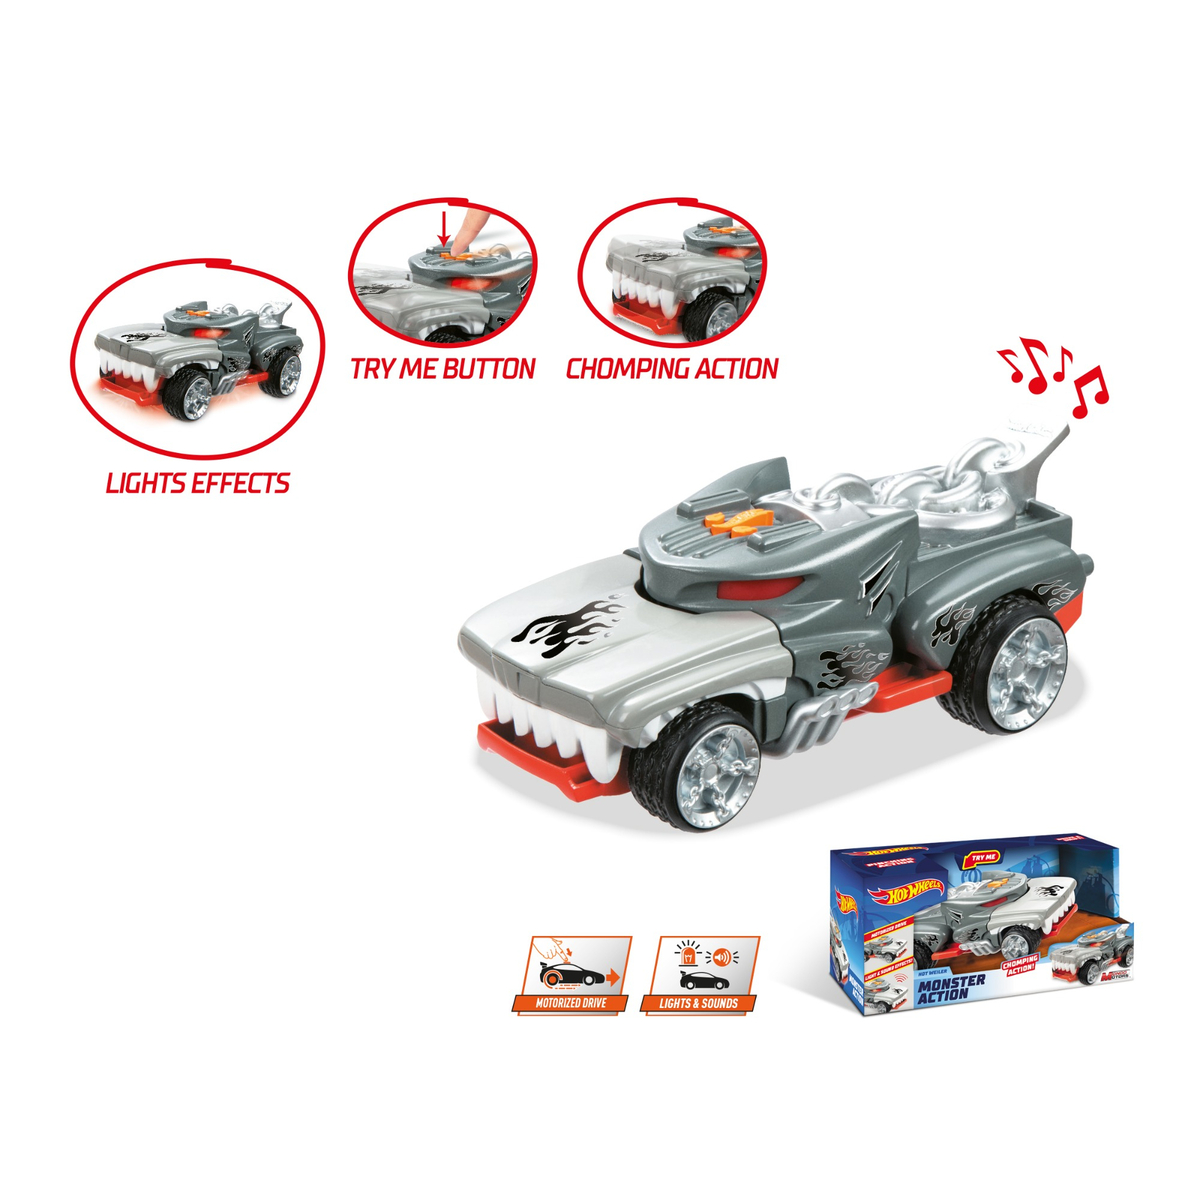 Hotwheels Lights and Sounds Monster Action Car, Grey, 51221